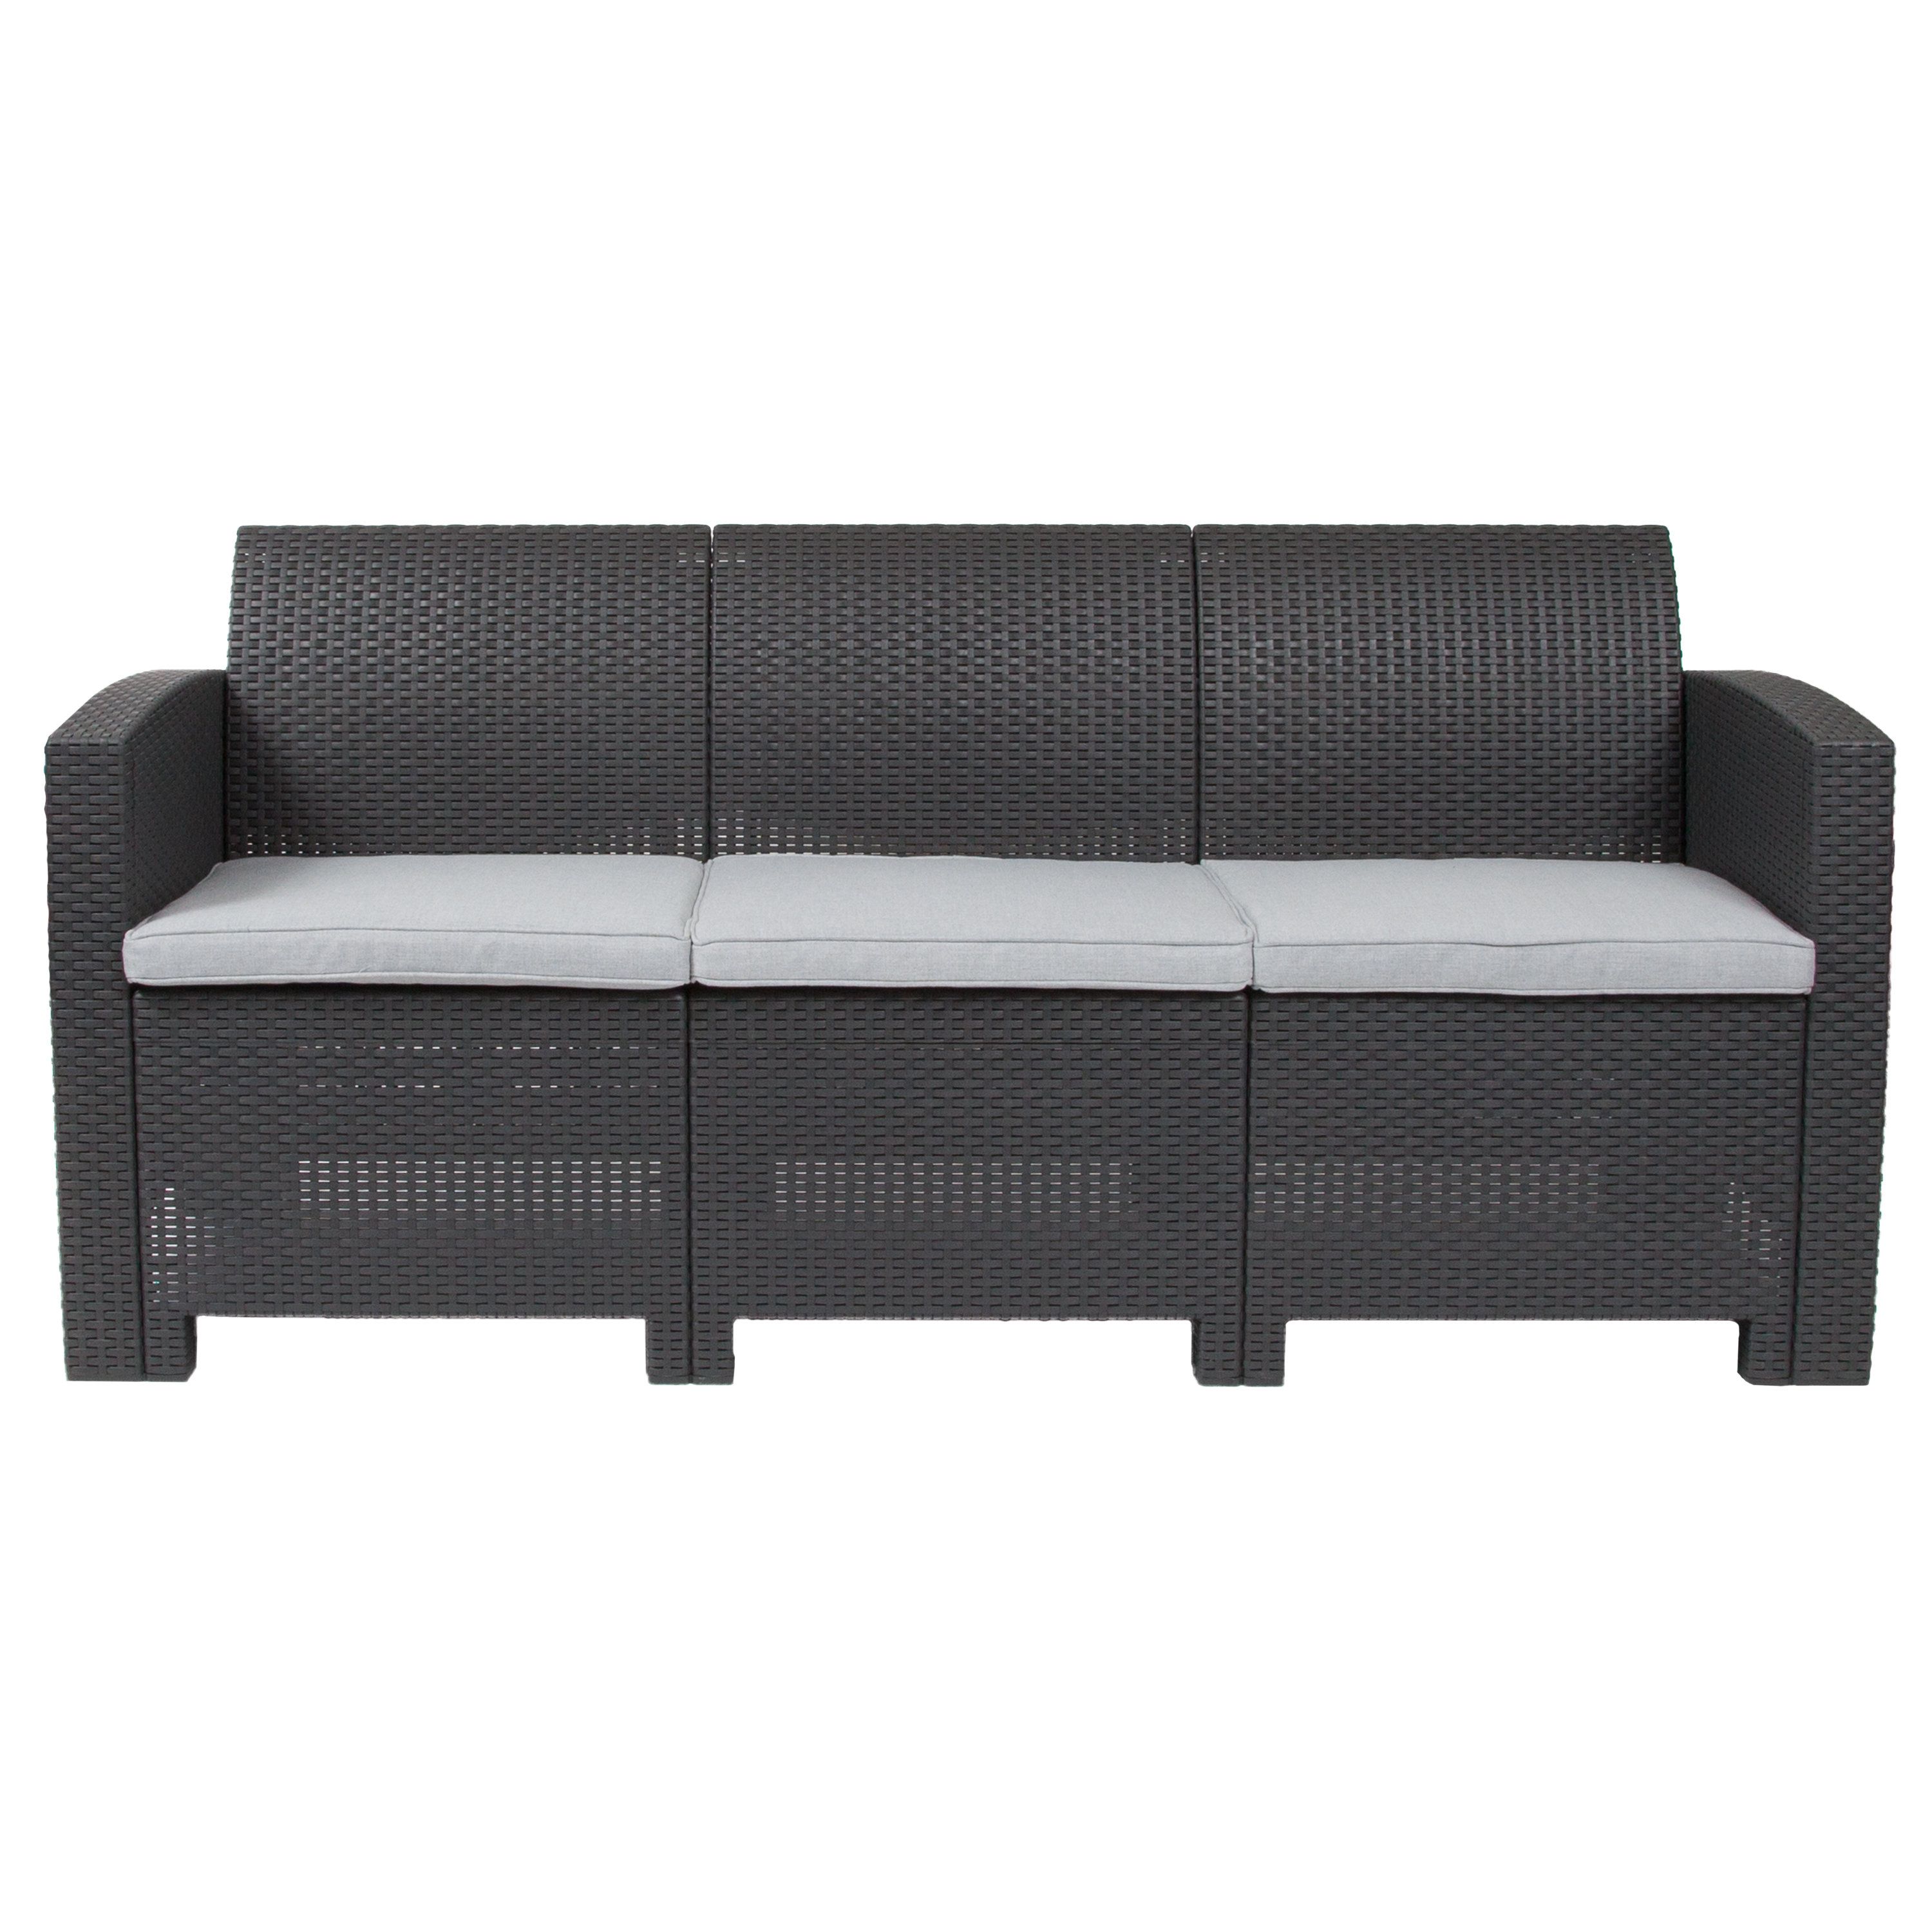 Featured Photo of 20 Best Collection of Stockwell Patio Sofas with Cushions